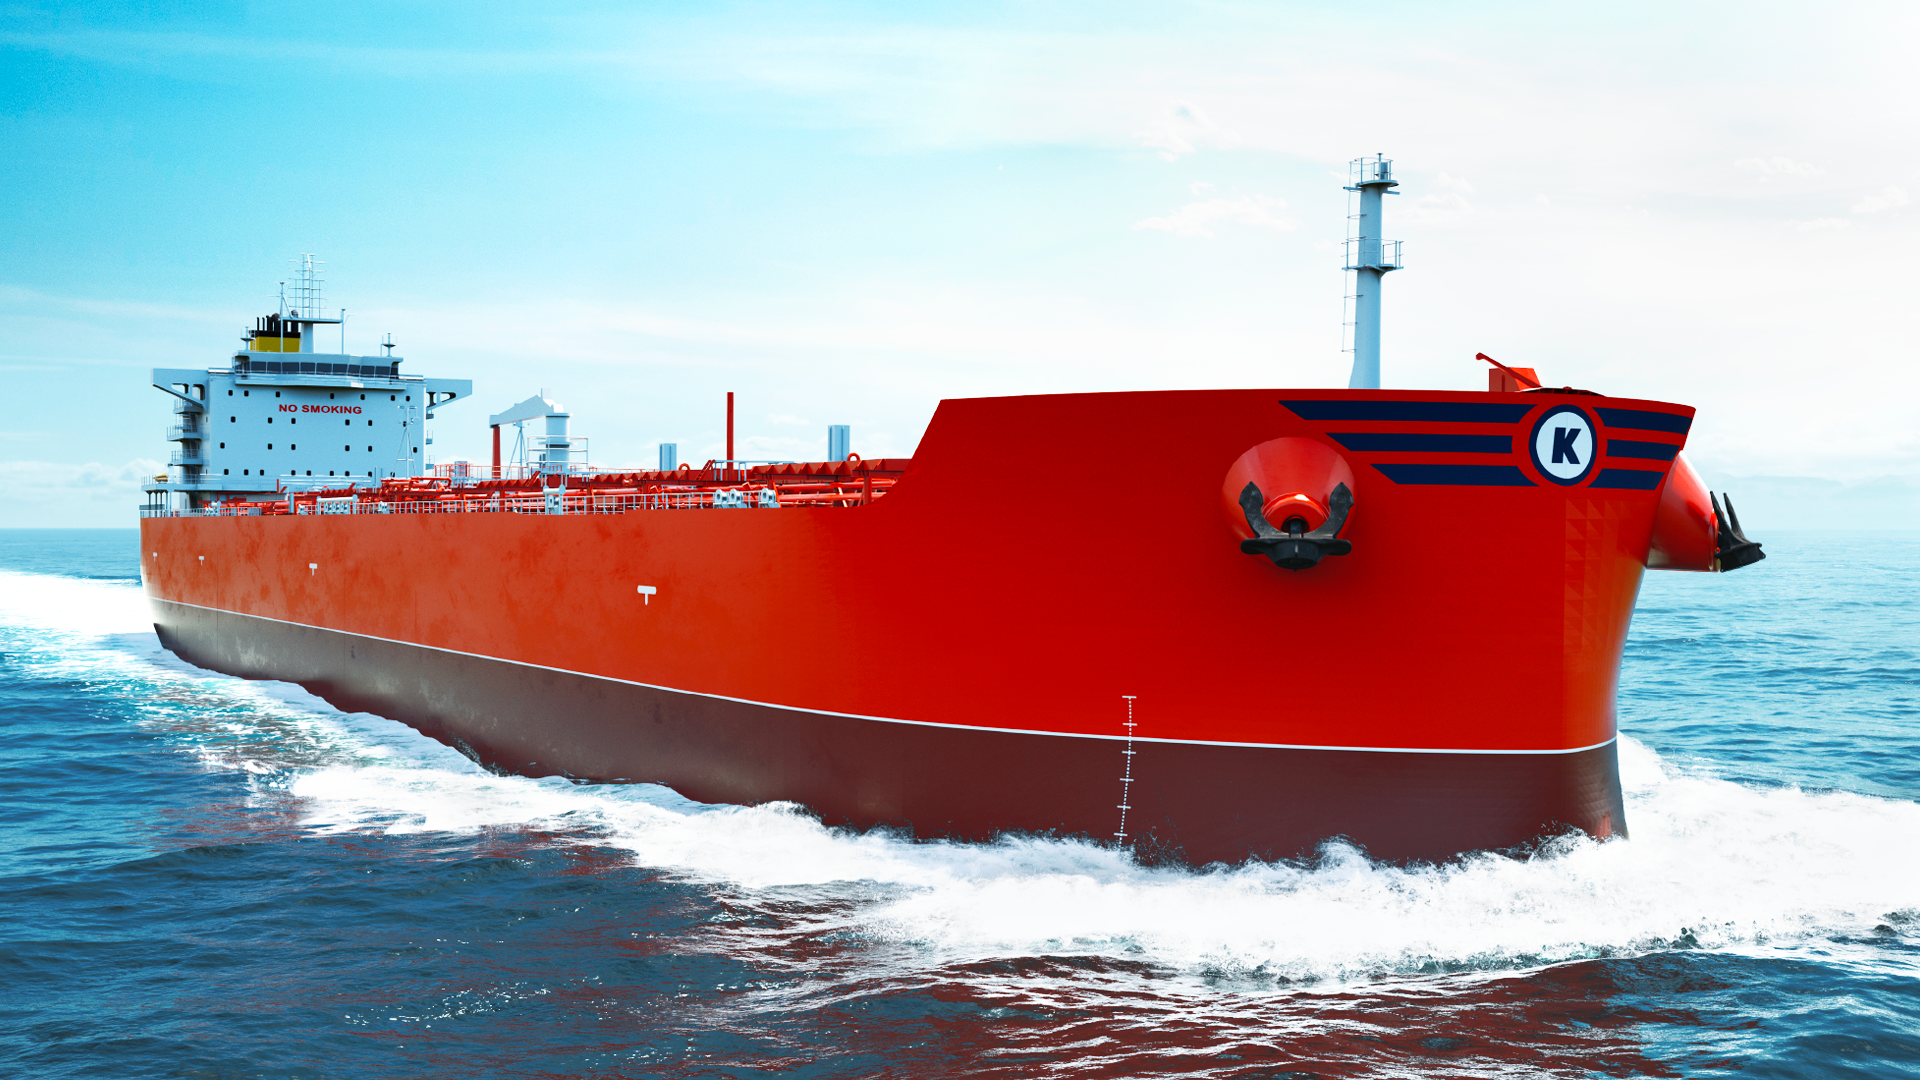 Klaveness Combination Carriers secures the first sustainability linked bank financing in Norwegian shipping